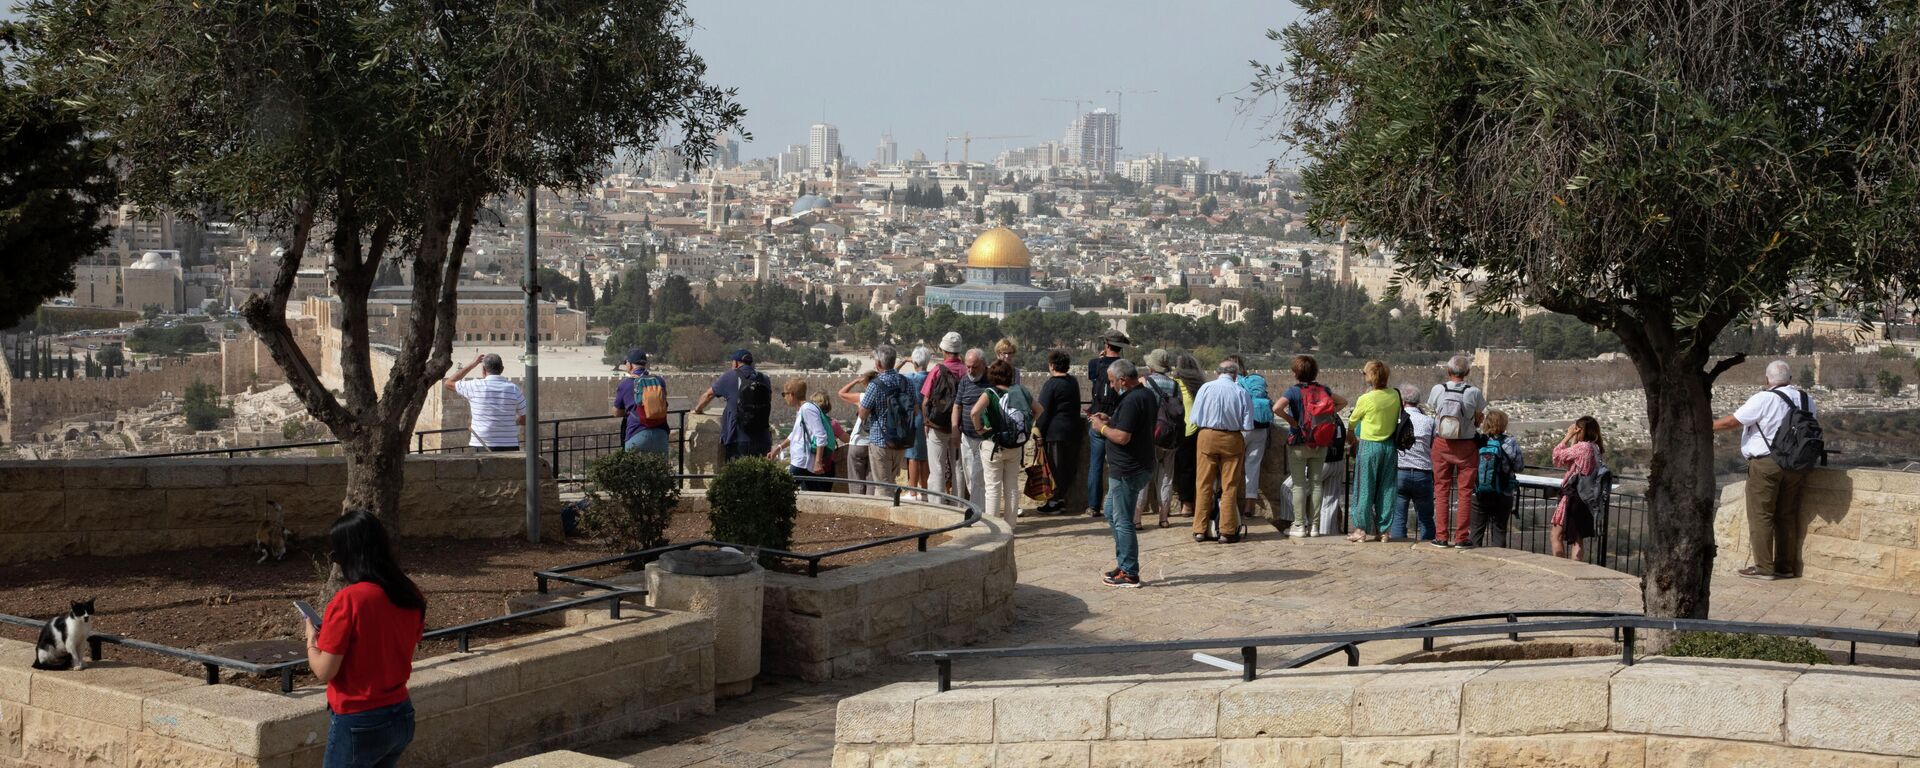 French tourists look at the Al Aqsa Mosque compound from the Mount of Olives in Jerusalem, Monday, Nov. 1, 2021 - Sputnik International, 1920, 01.03.2022